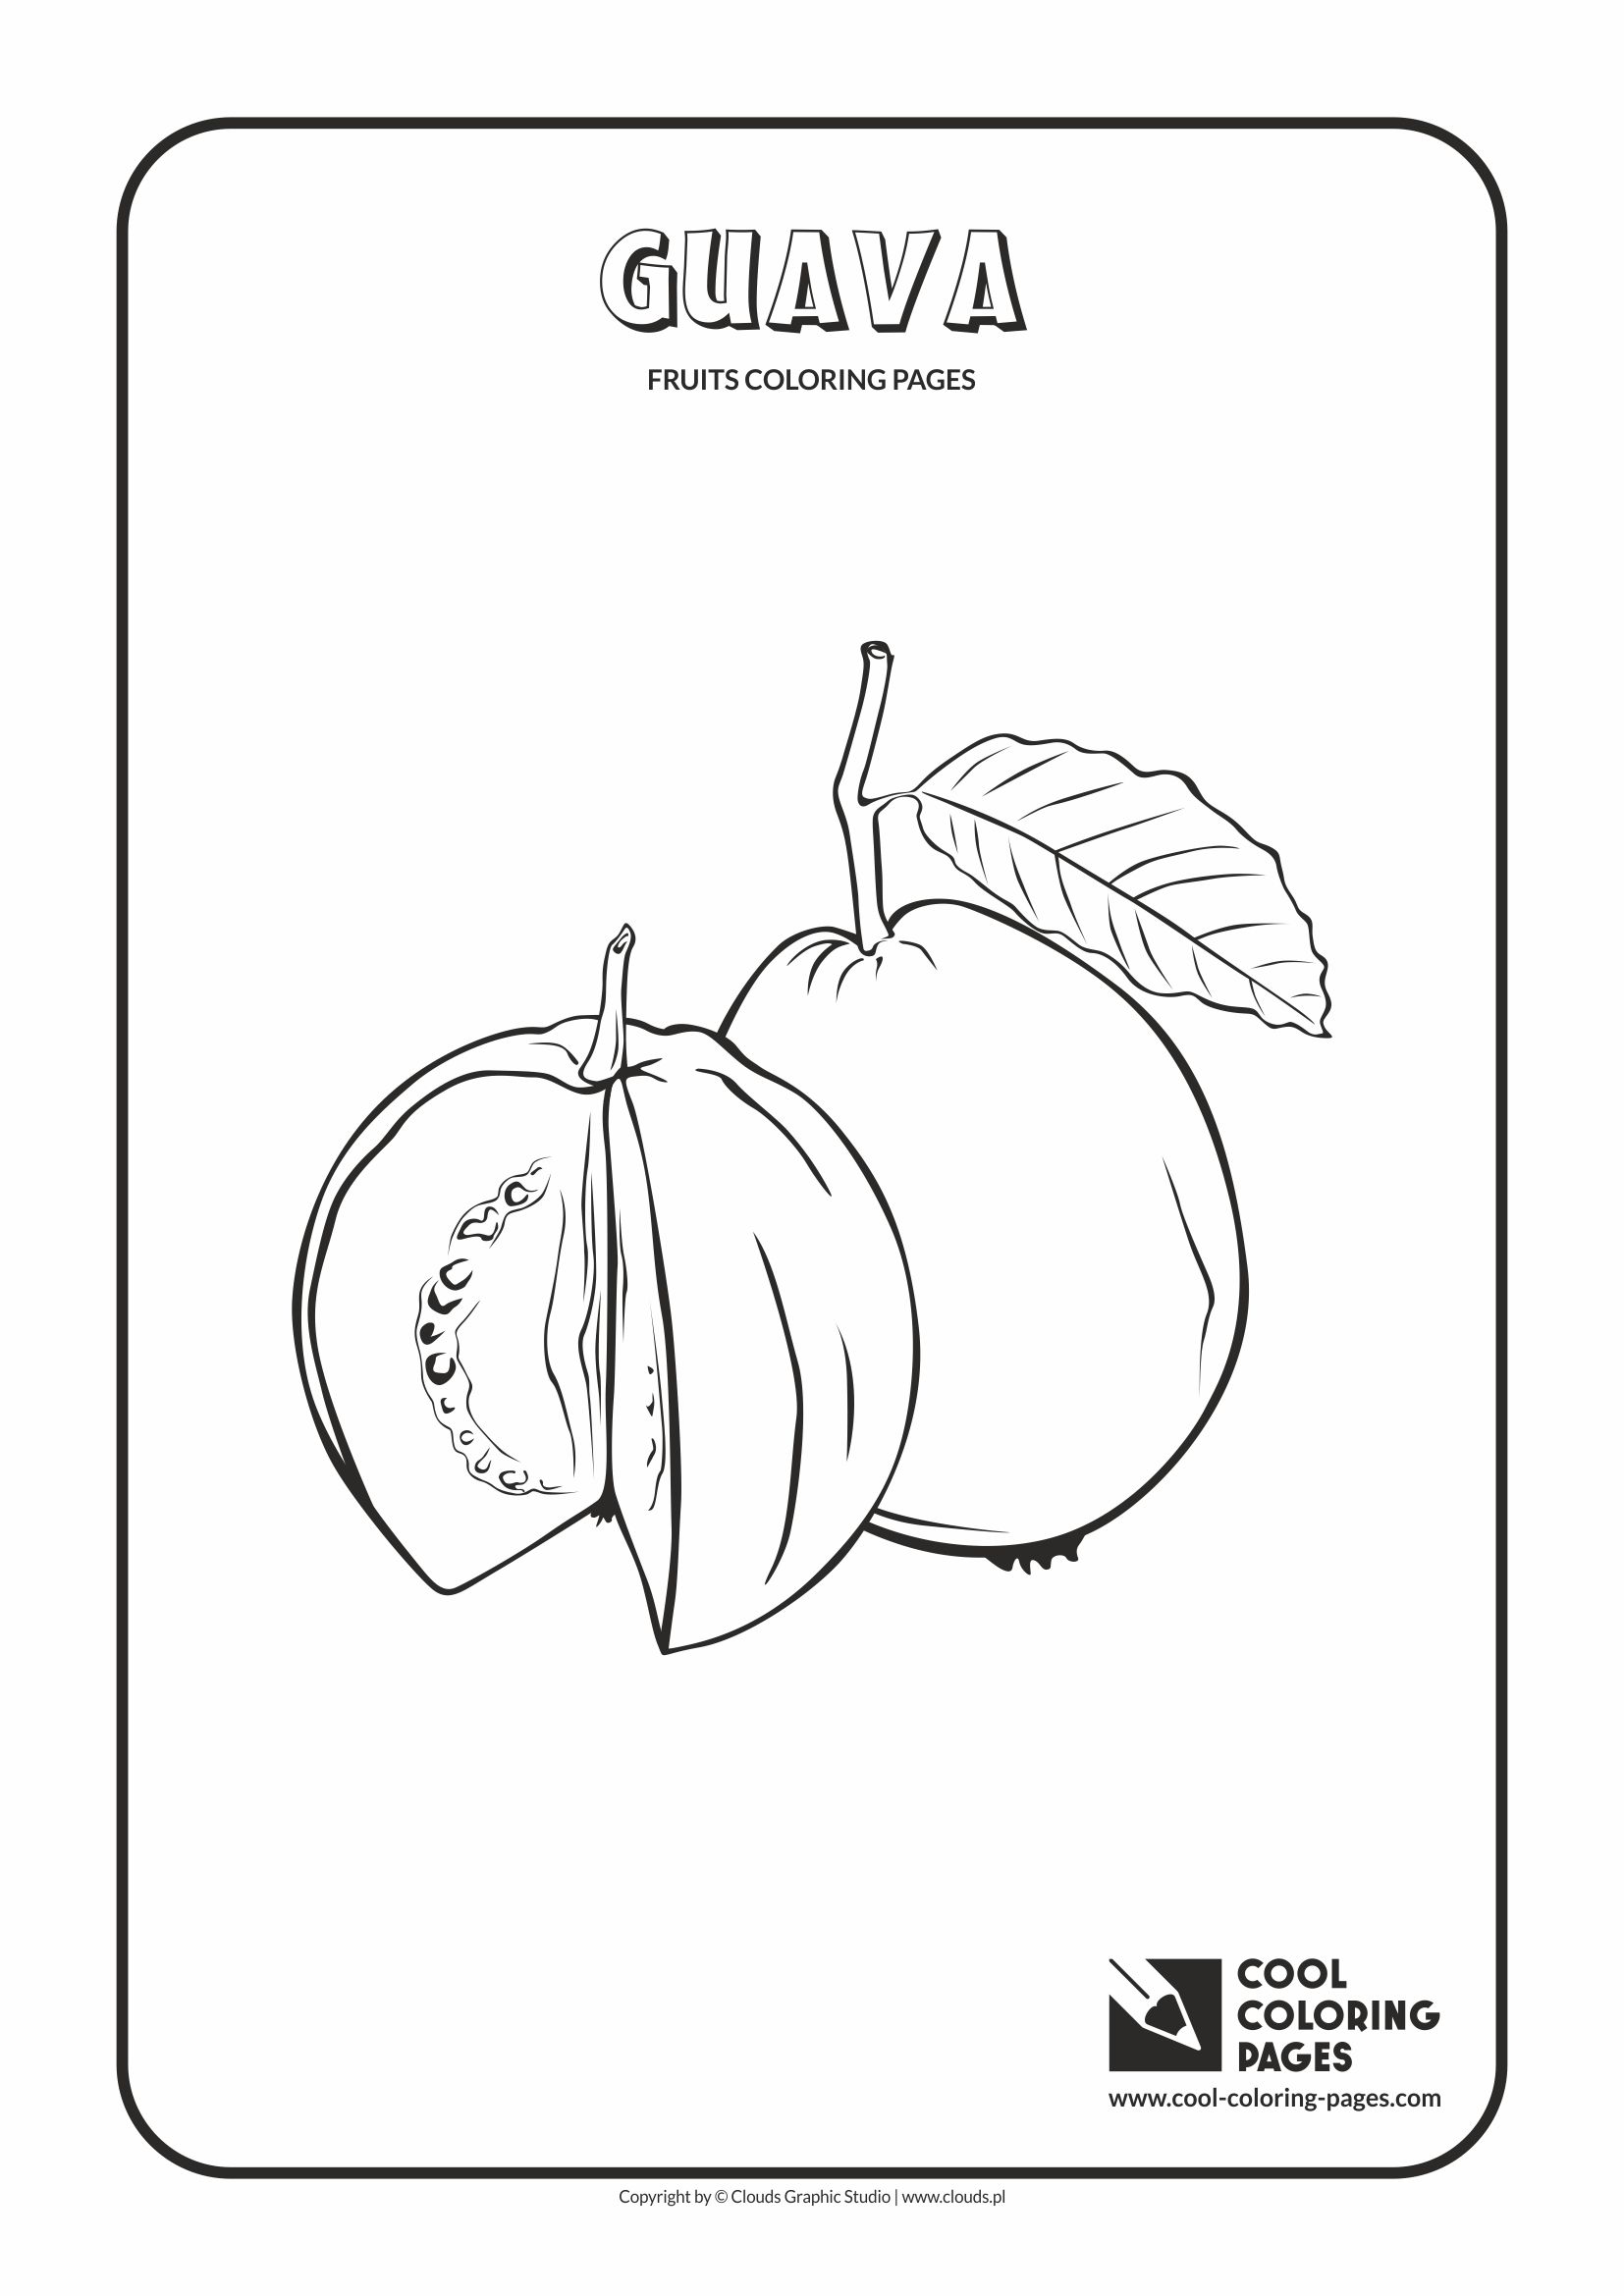 Cool Coloring Pages - Plants / Guava / Coloring page with guava